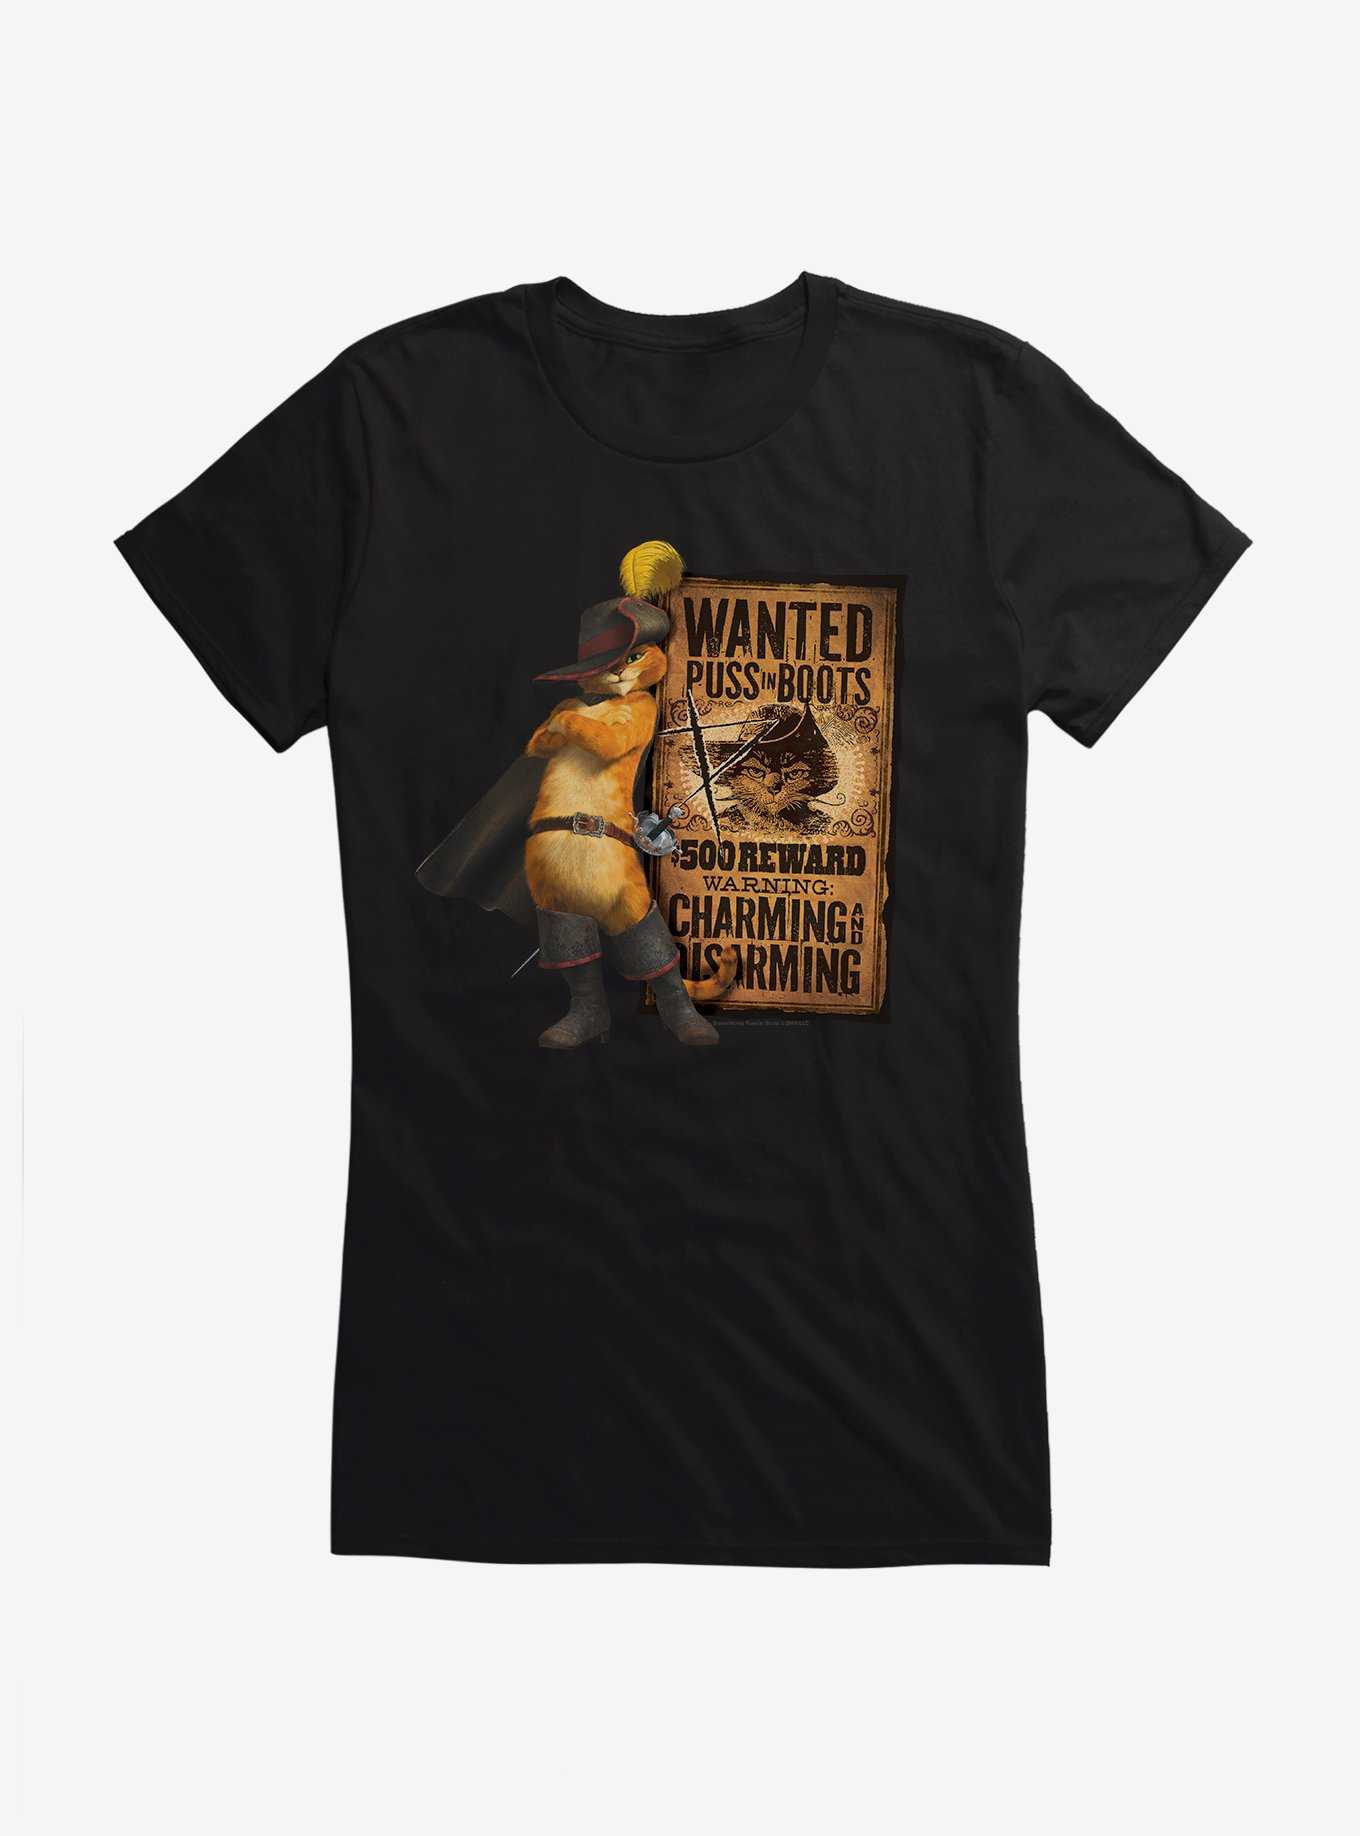 Puss In Boots Wanted Poster Girls T-Shirt, , hi-res